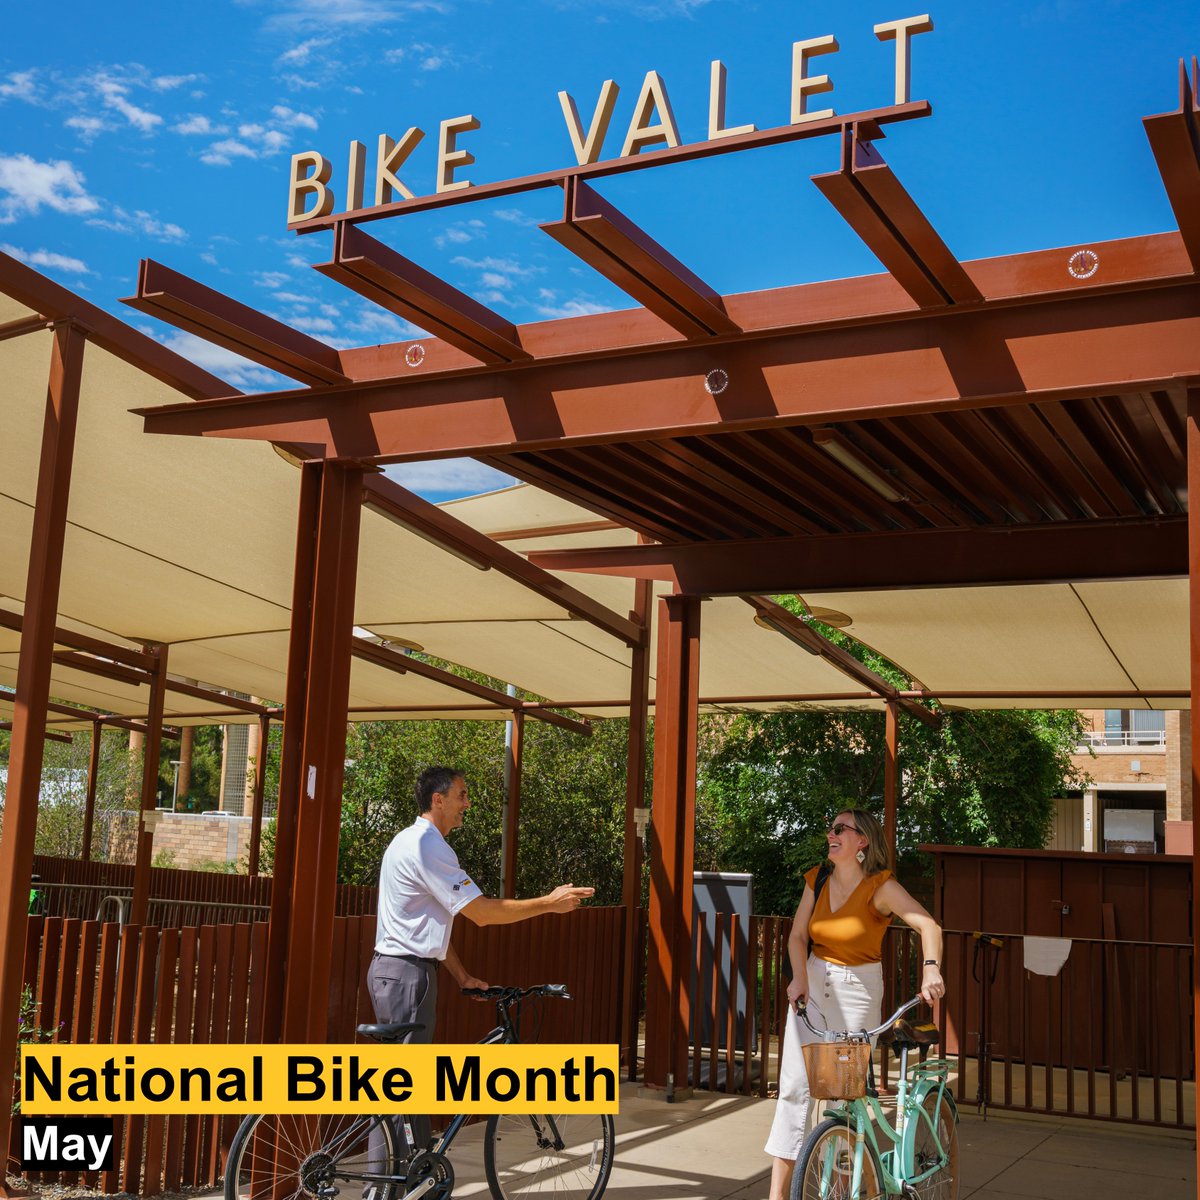 🚲 May is National Bike Month! 🌿 Whether you're a seasoned cyclist or just starting out, we've got you covered from bike repair resources to route planning assistance! Link in our bio to learn more. #NationalBikeMonth #BikeASU #earthdayeveryday #greeningmaroonandgold